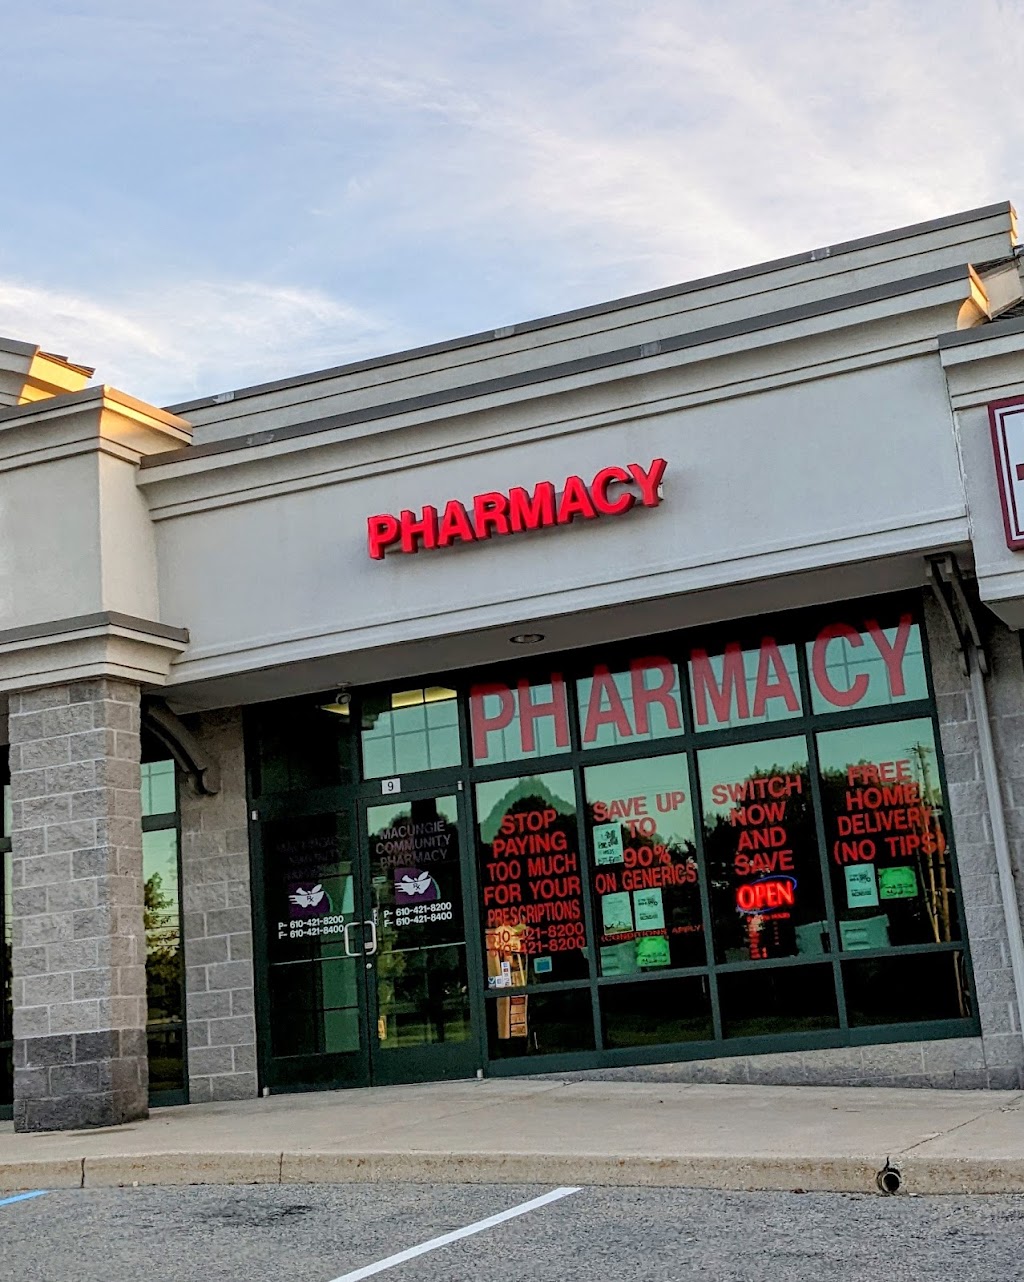 Macungie Community Pharmacy | 6465 Village Ln STE 9, Macungie, PA 18062 | Phone: (610) 421-8200